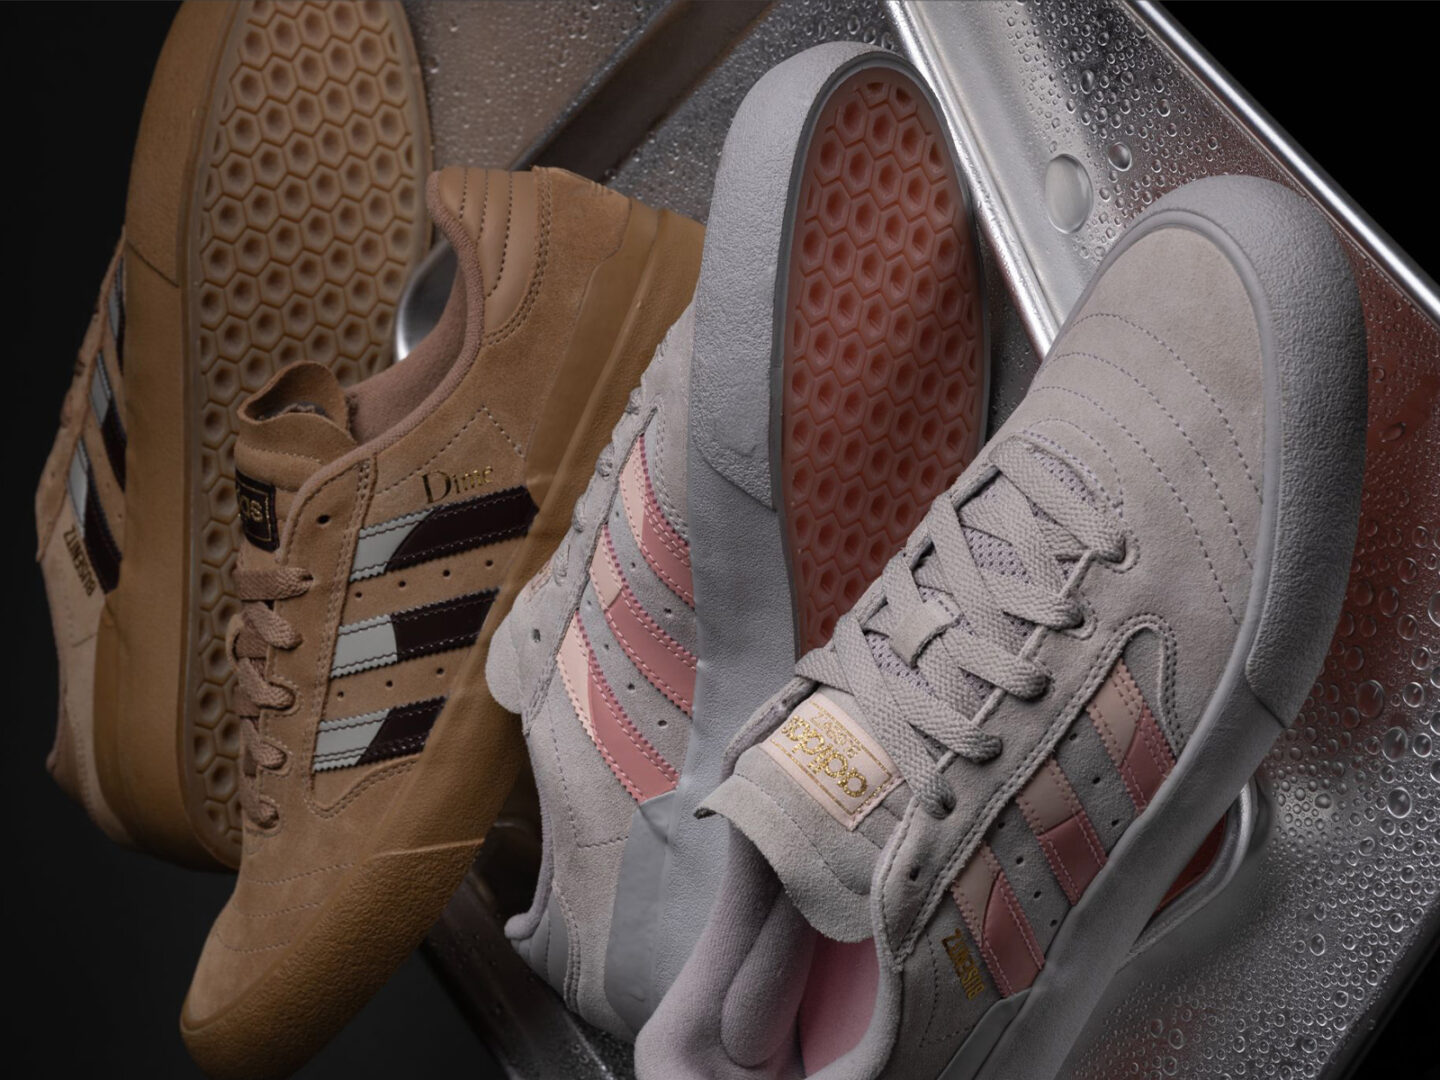 Check out the adidas Skateboarding Busenitz Vulc II and Dime